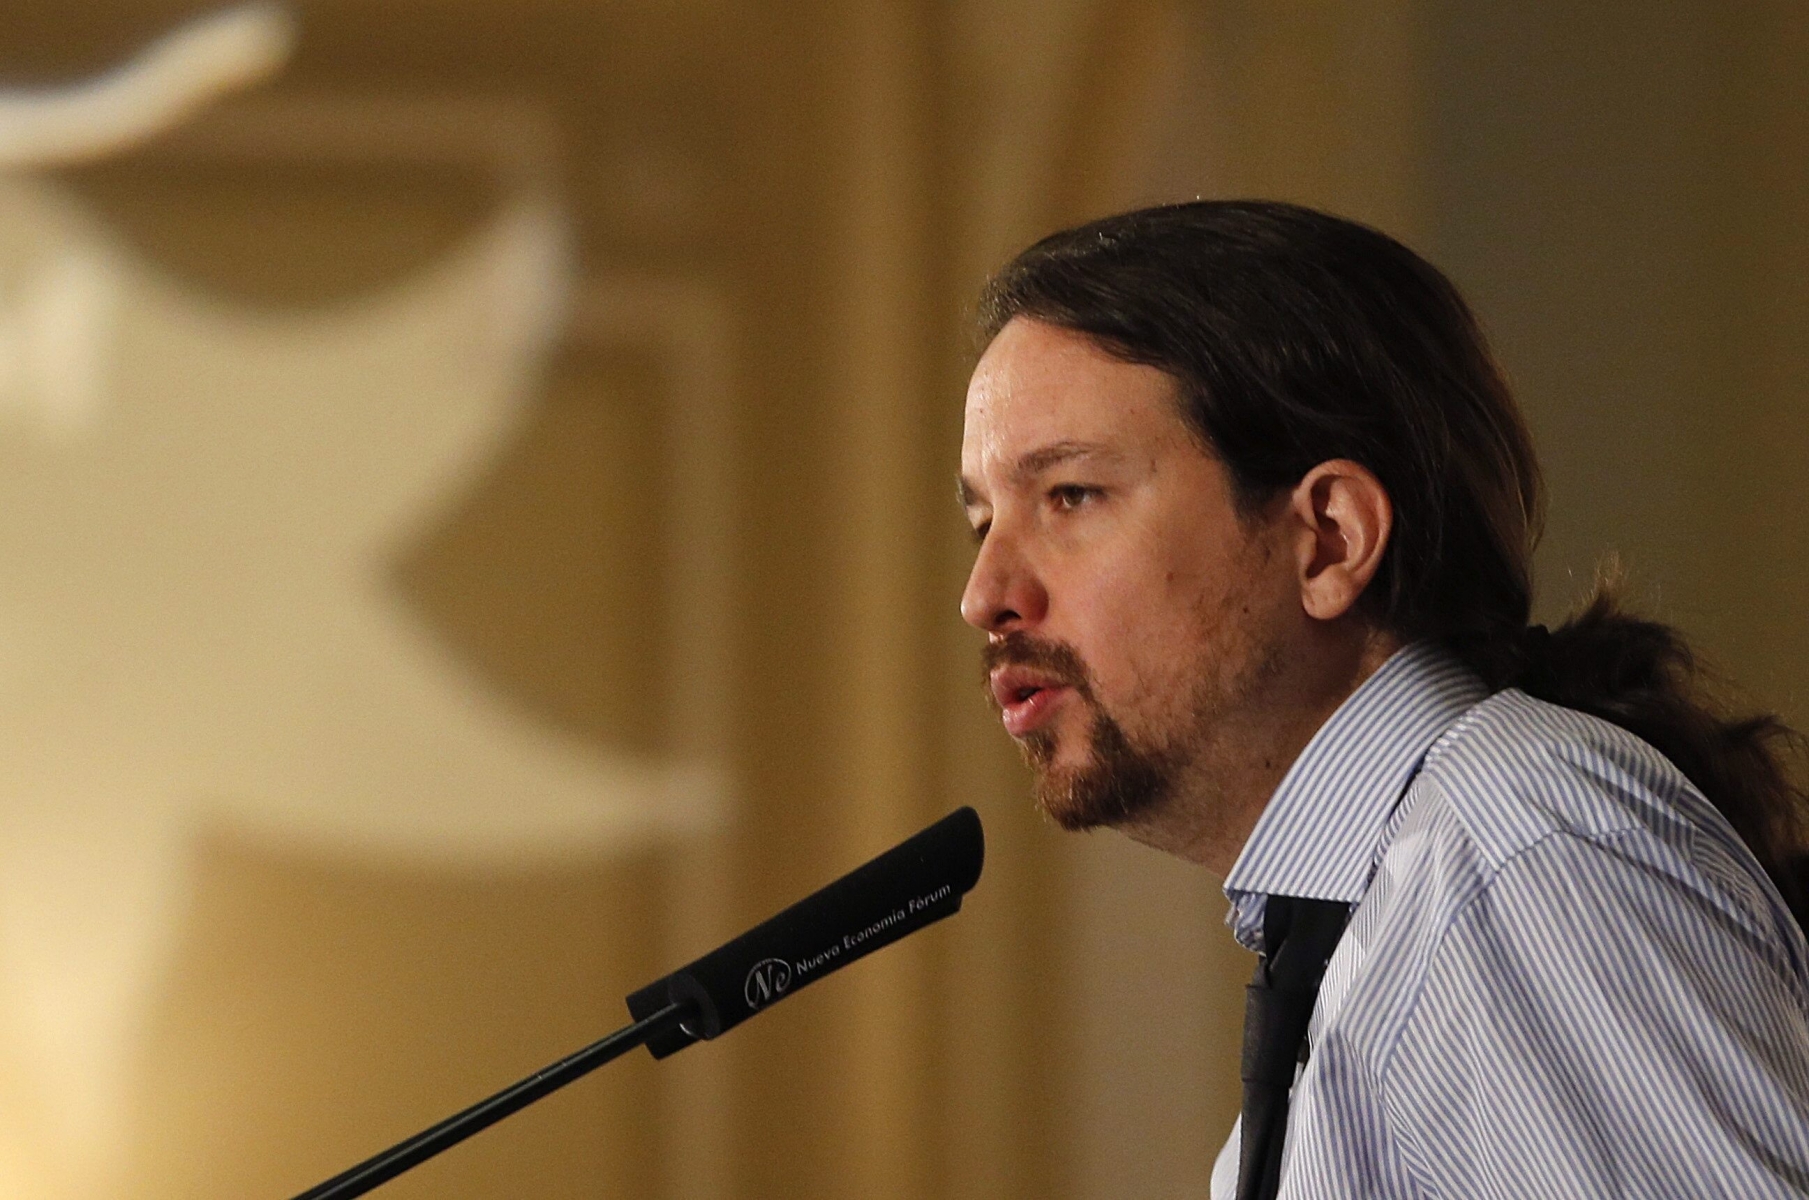 epa05348282 Pablo Iglesias, leader of Spanish party 'Podemos' ('We can'), attends a briefing breakfast at a hotel in Madrid, Spain, 06 June 2016. 'Podemos' and the 'Izquierda Unida' (United left) party have agreed to present a joint candidacy for Spain's general elections as a coalition 'Unidos Podemos' ('United we can') in order to join forces to obtain enough votes to form a government next 26 June 2016.  EPA/BALLESTEROS SPAIN ELECTIONS PARTIES